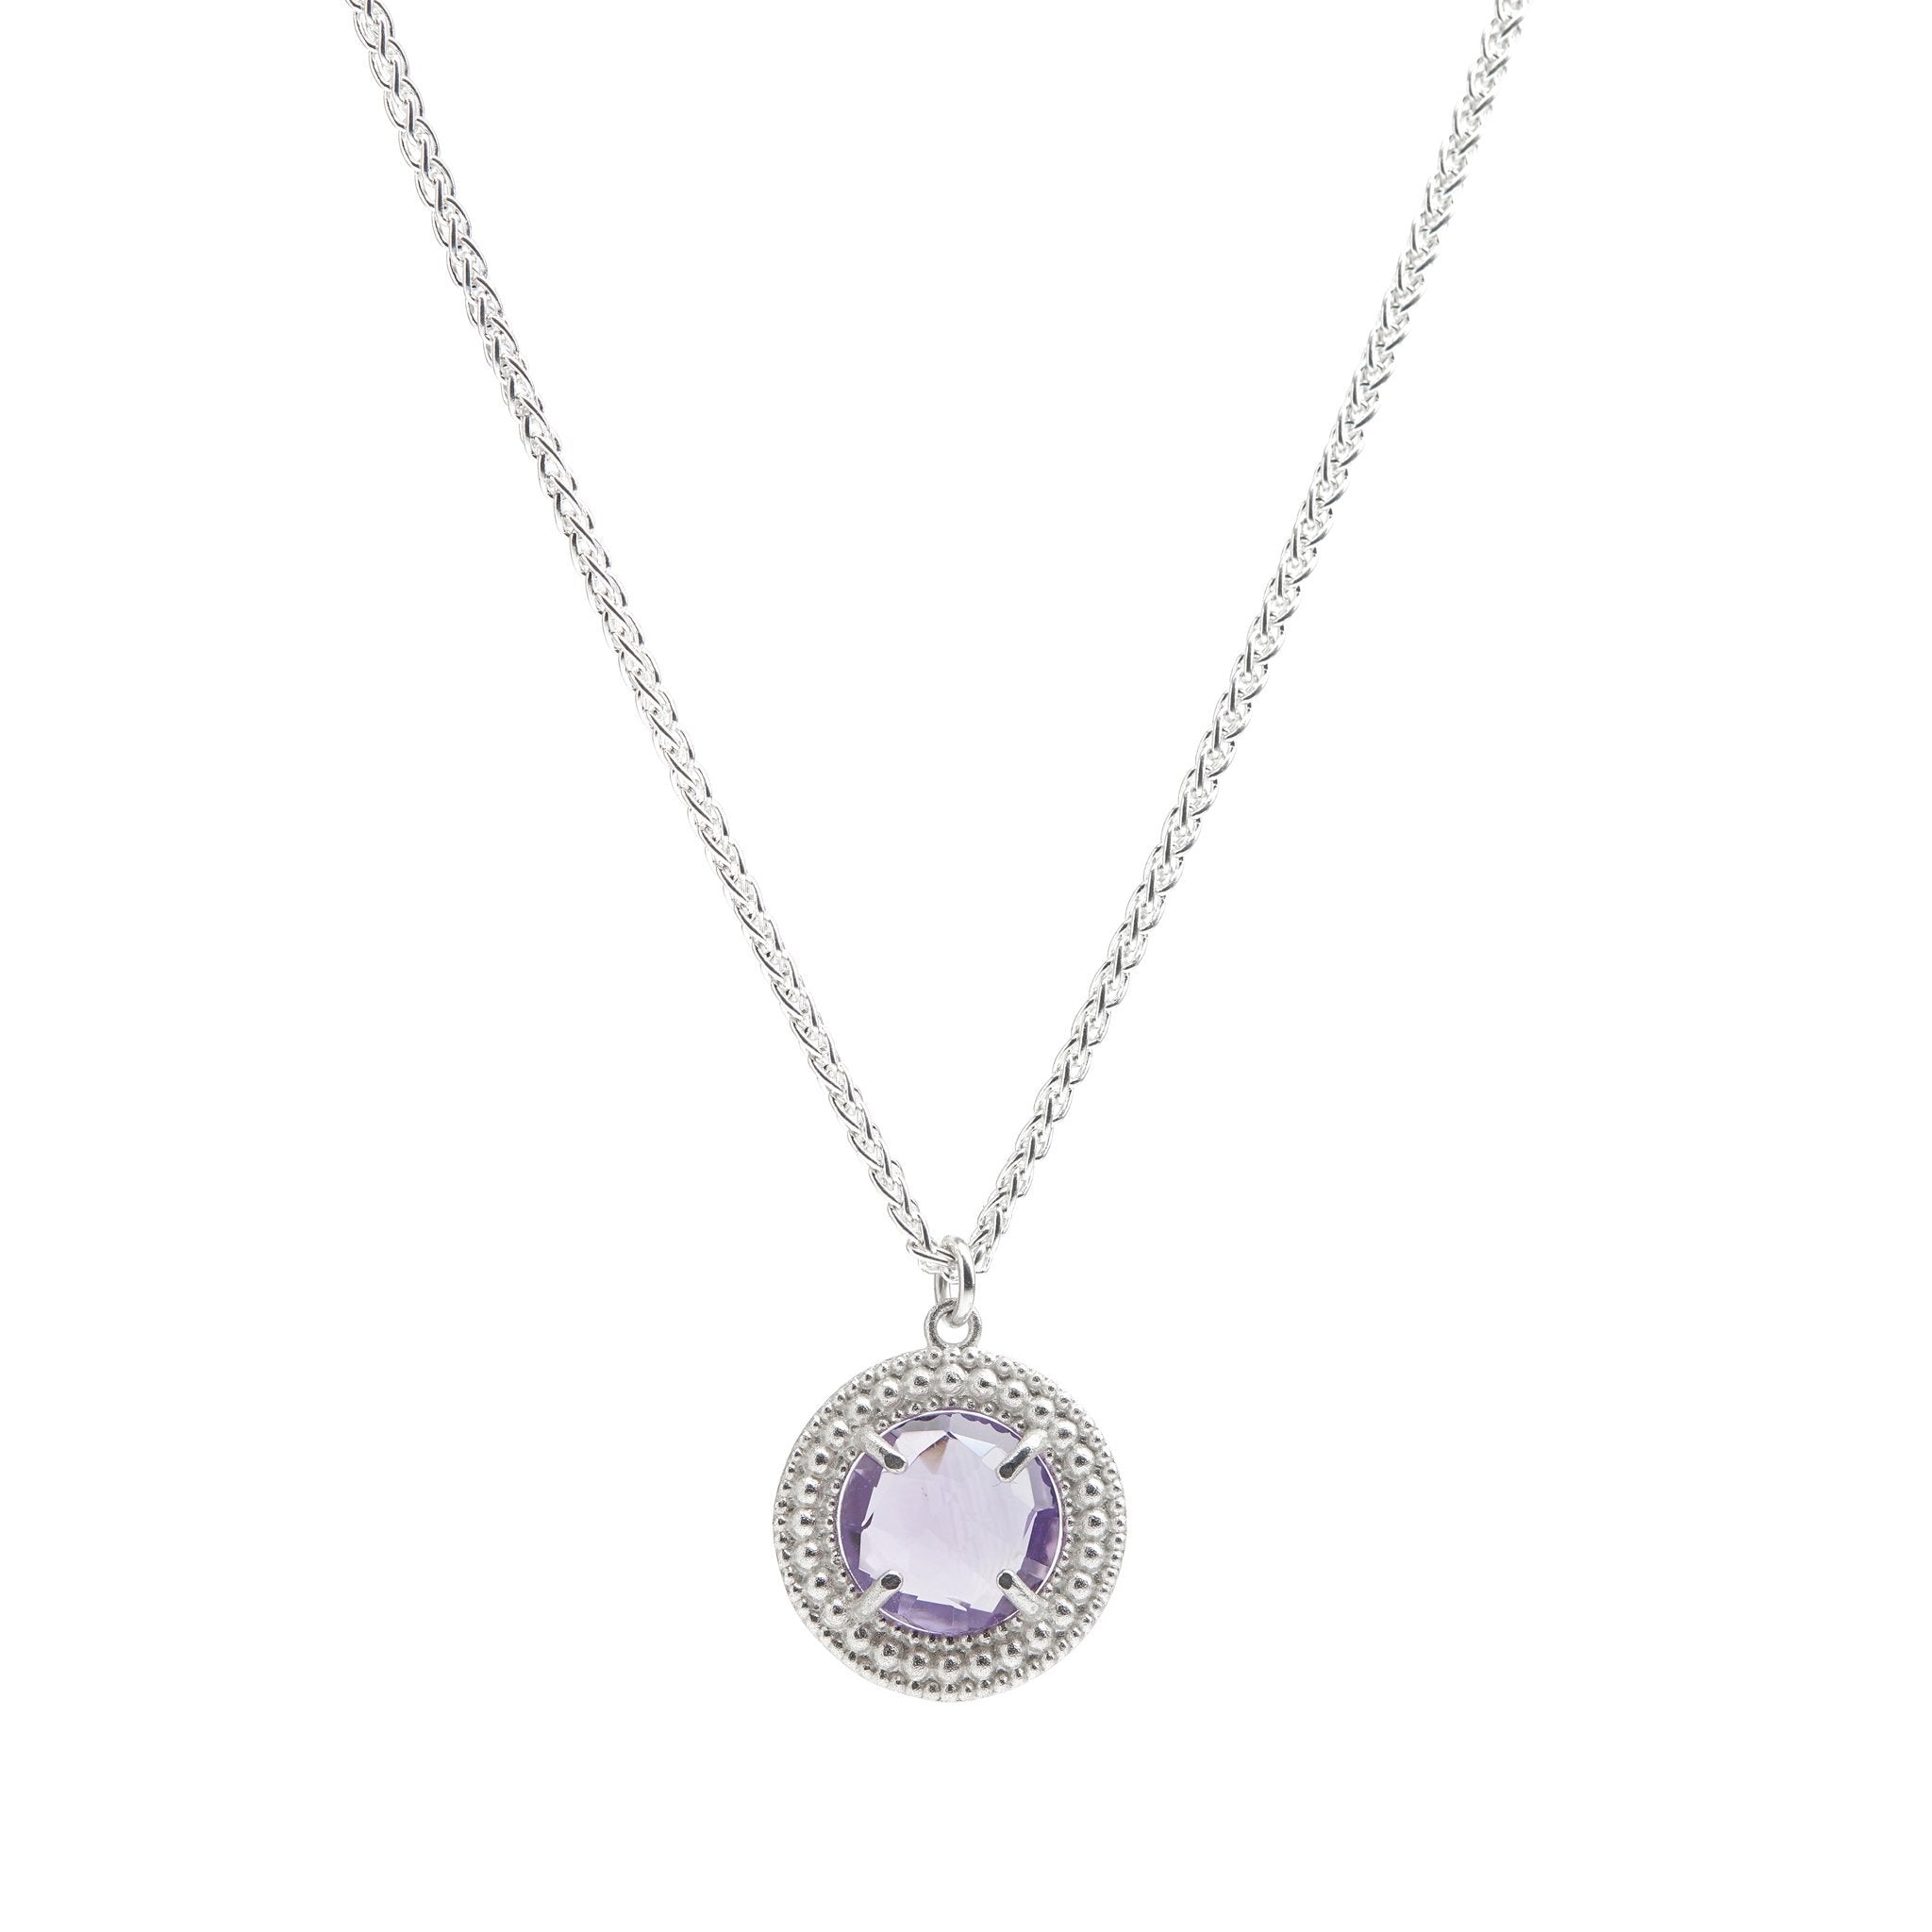 The Renaissance Classic Necklace in Purple Amethyst - Christelle Chamberland